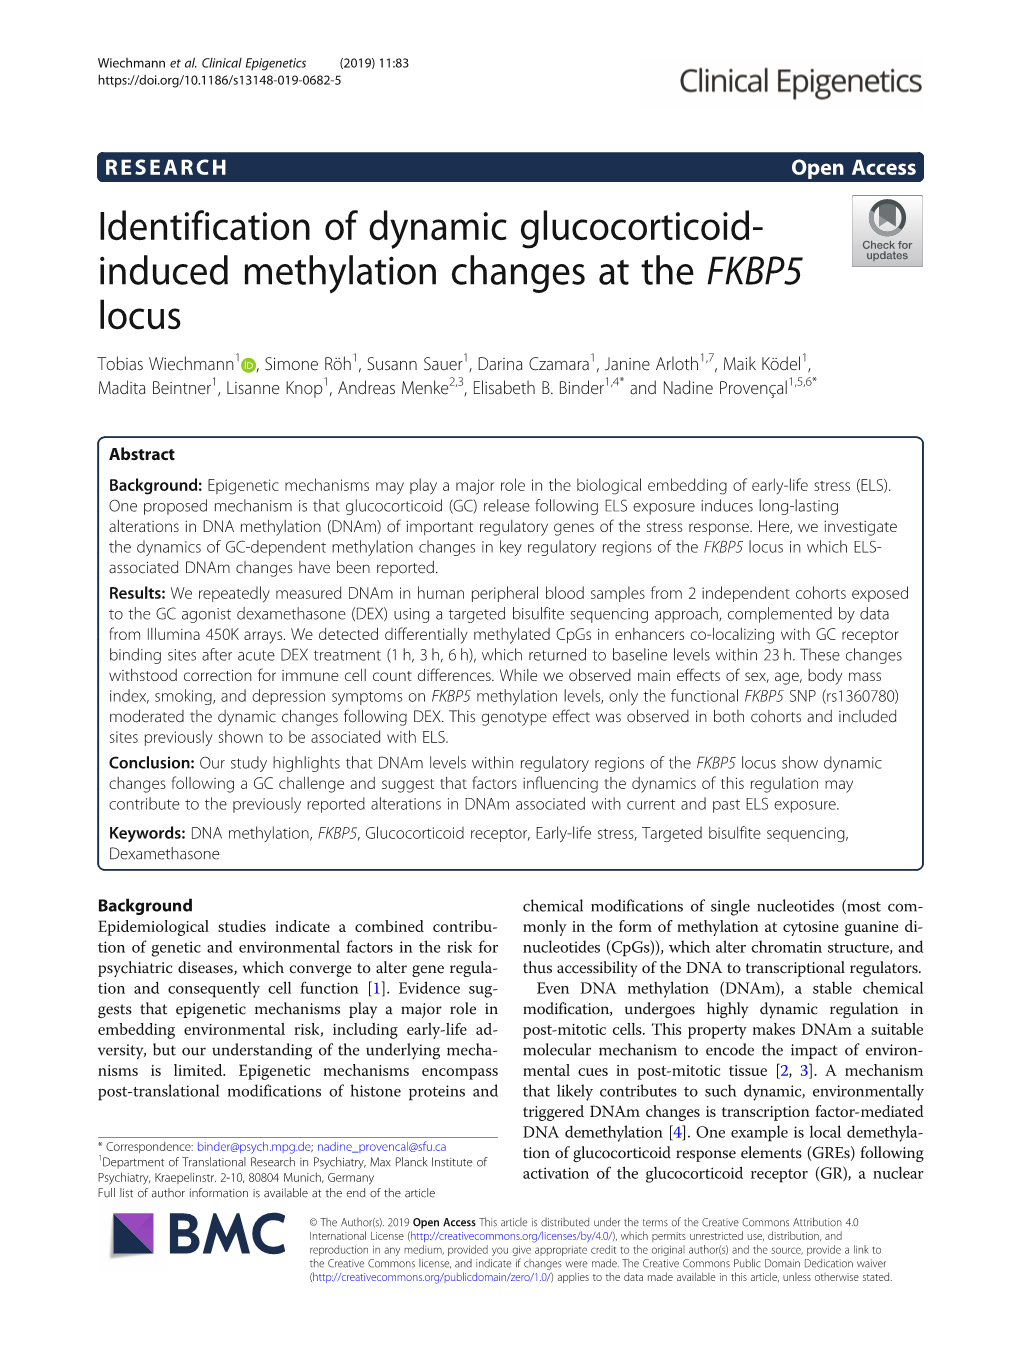 Identification of Dynamic Glucocorticoid-Induced Methylation Changes at the FKBP5 Locus